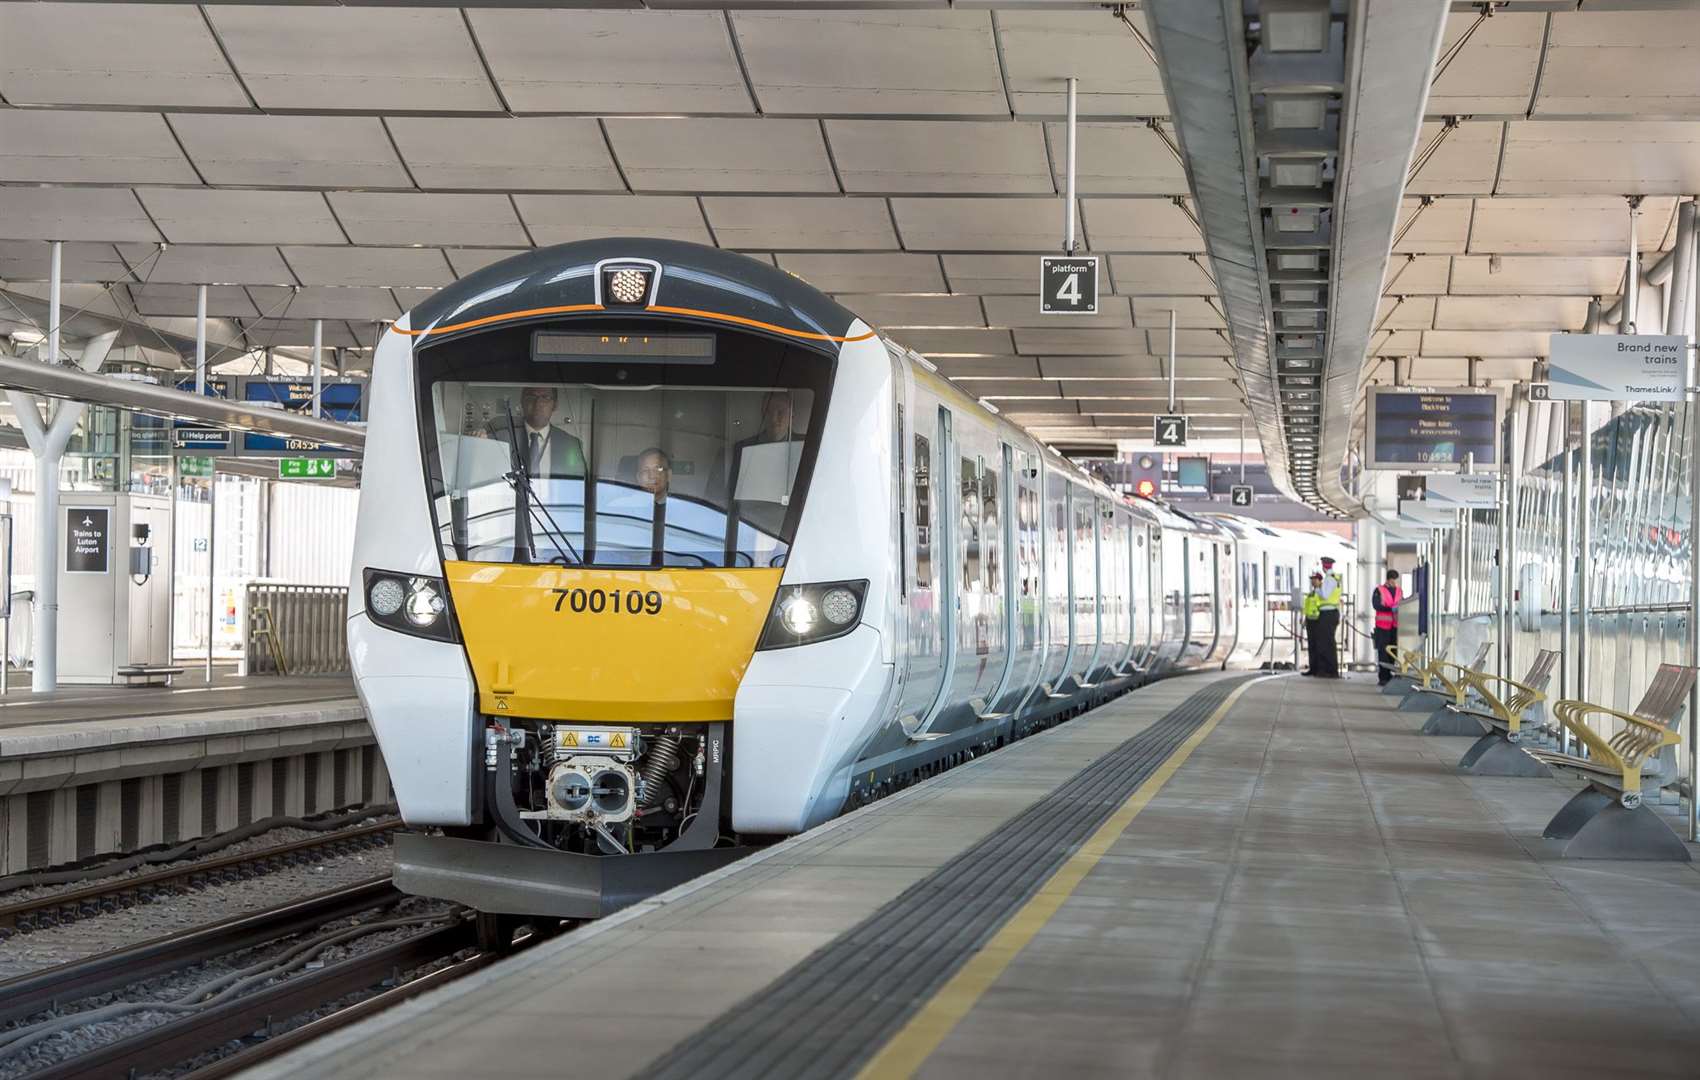 The council is lobbying the government for a new Thameslink service